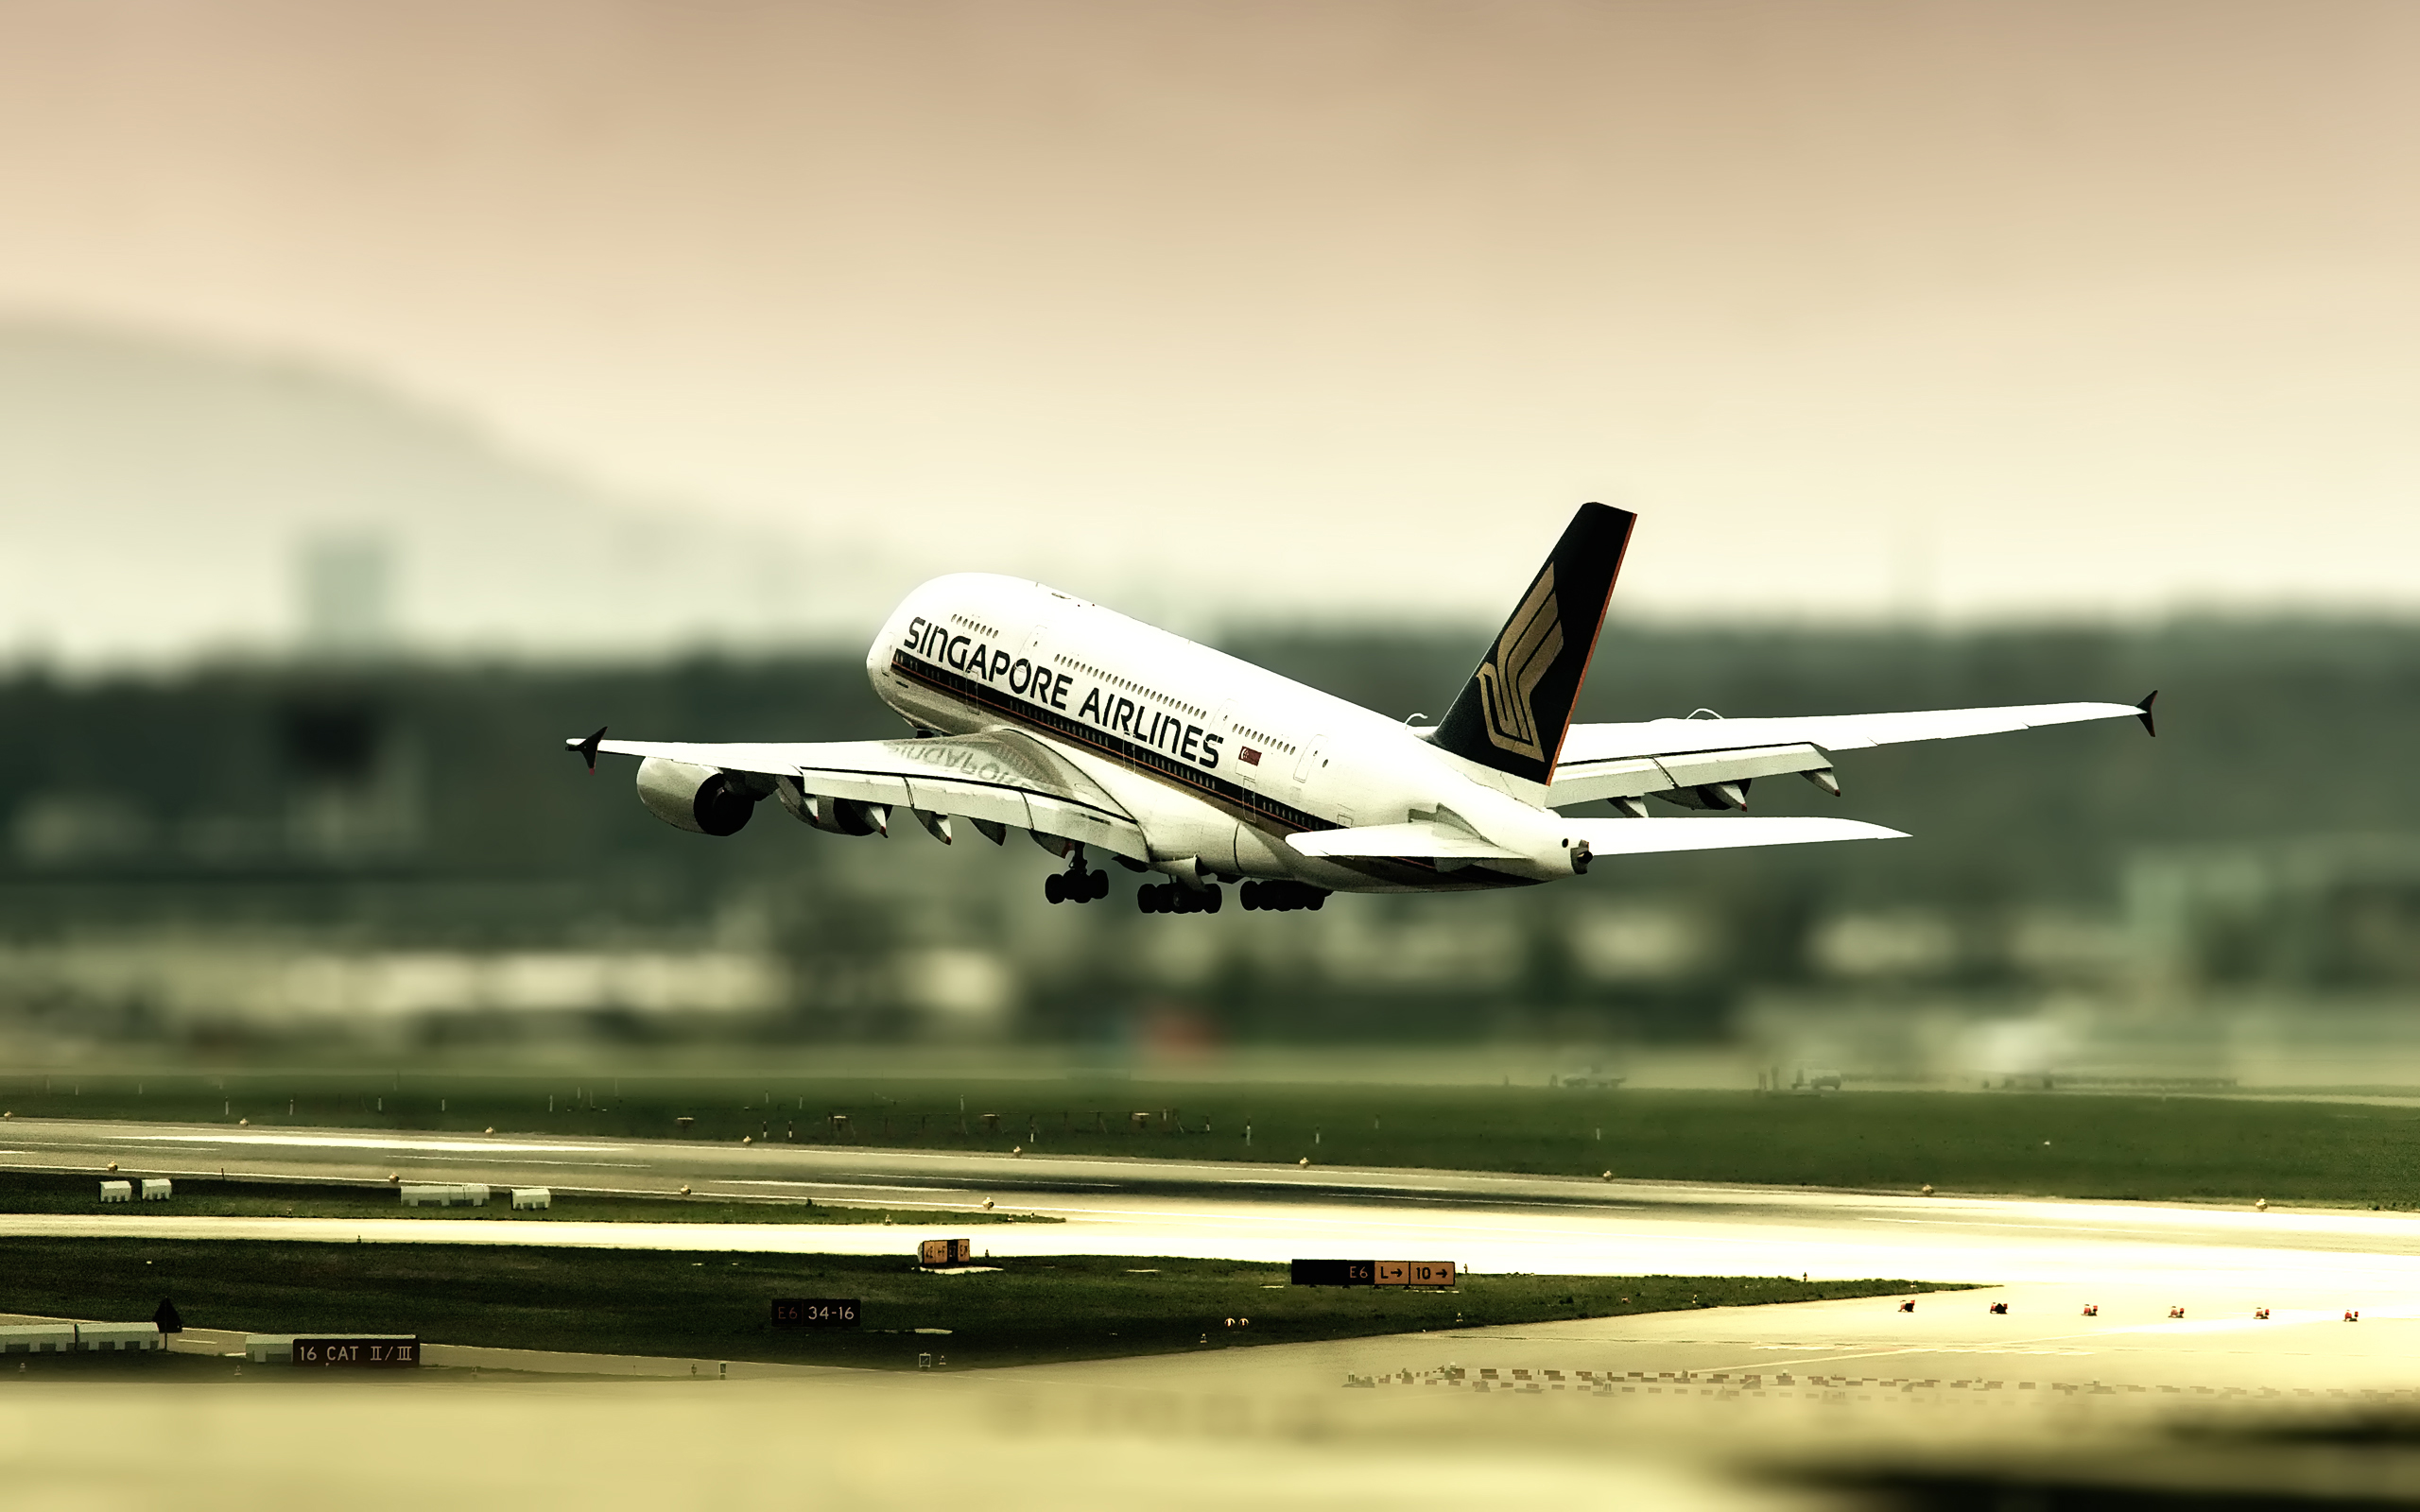 wallpapers airplane, vehicles, airbus a380, aircraft, airport, zurich